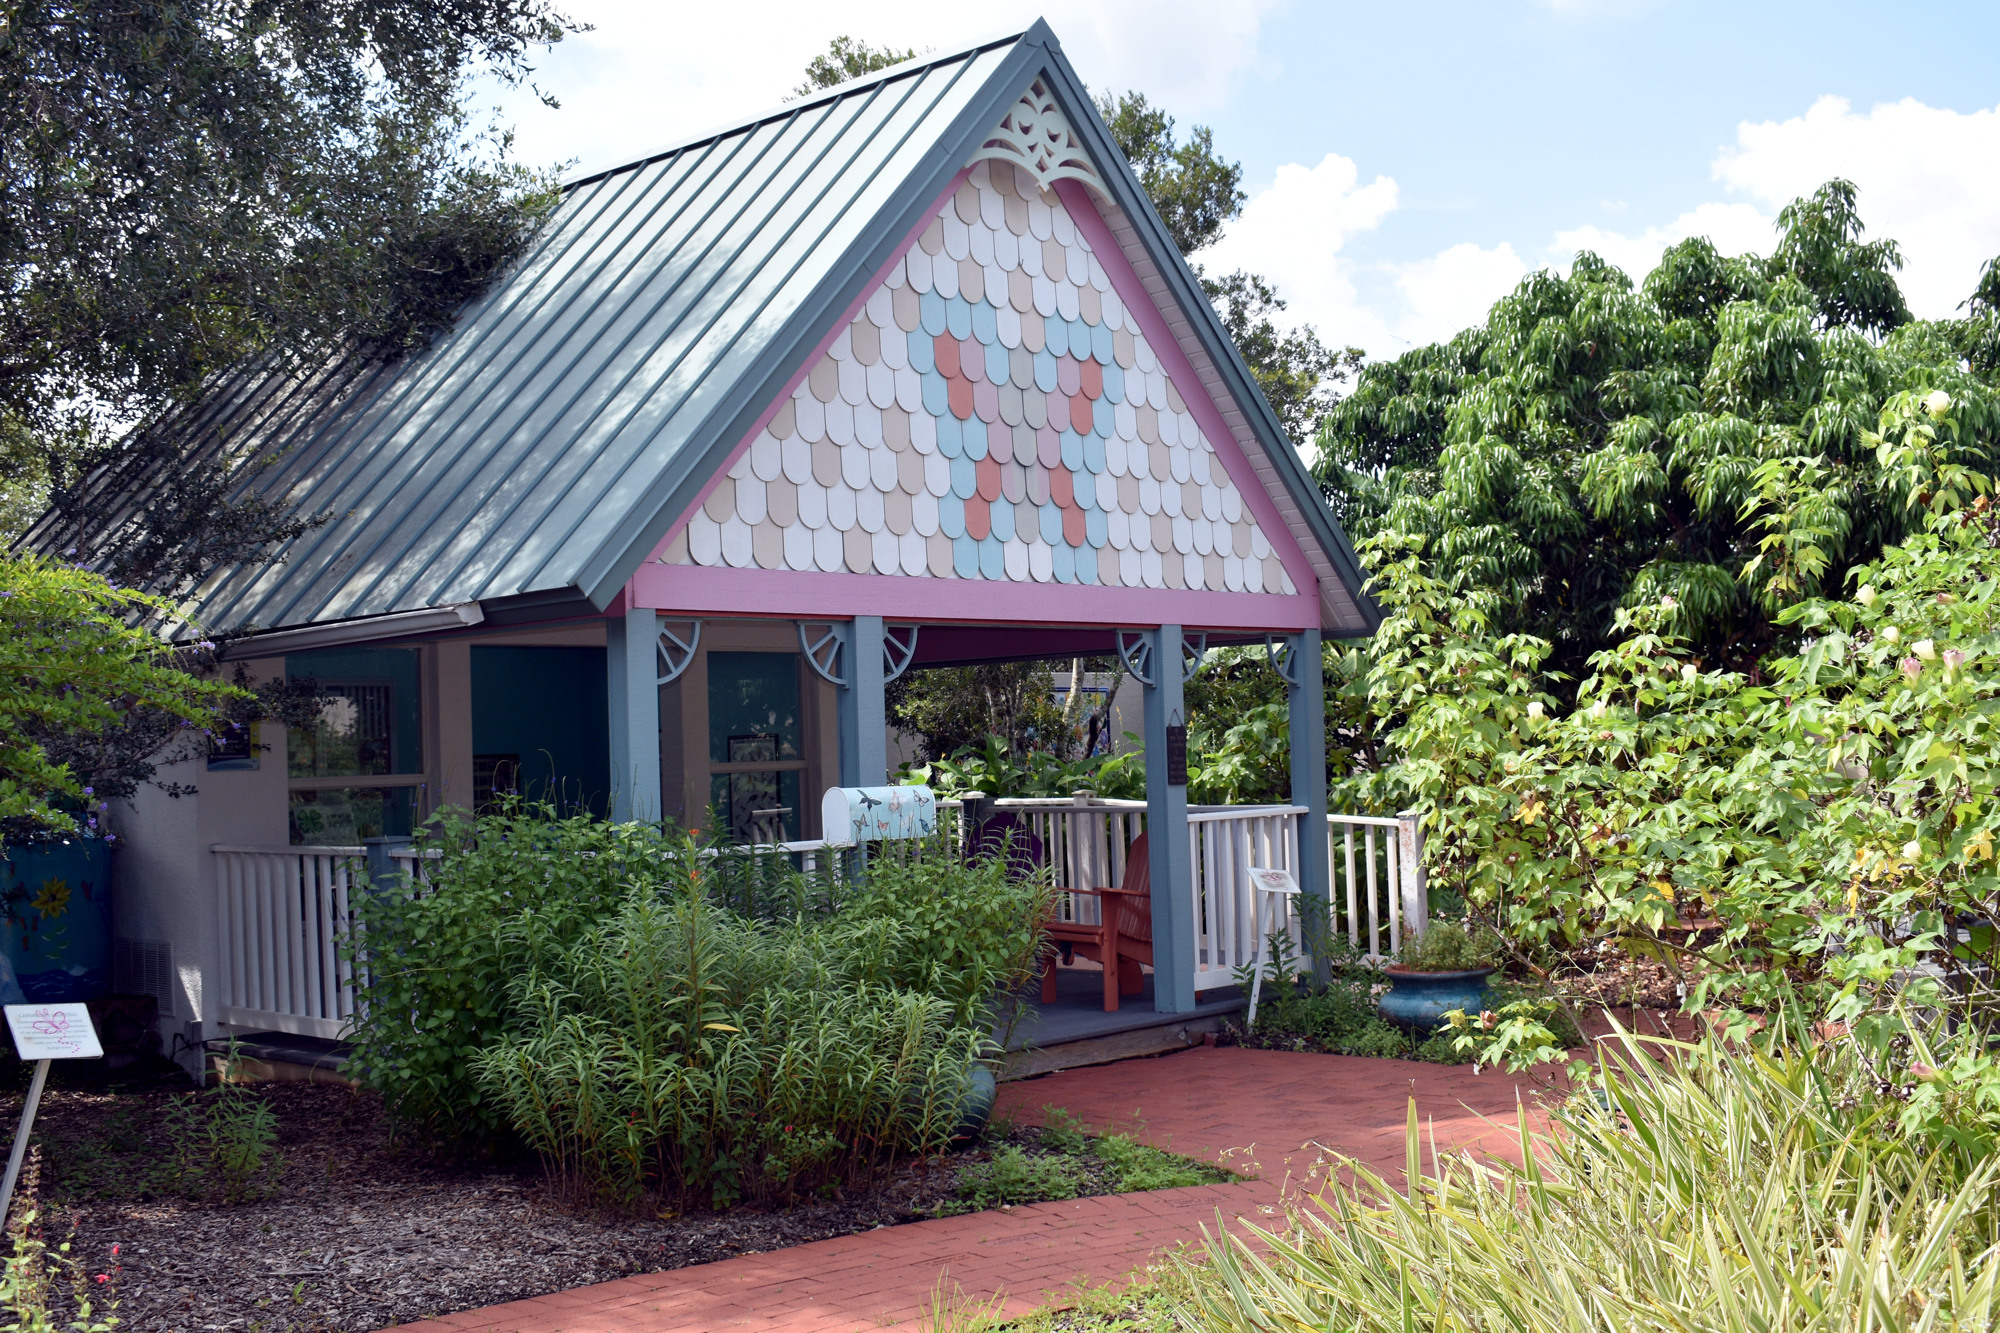 Children can enjoy reading and exploring in a cabin in the gardens at the Fruitville Library.